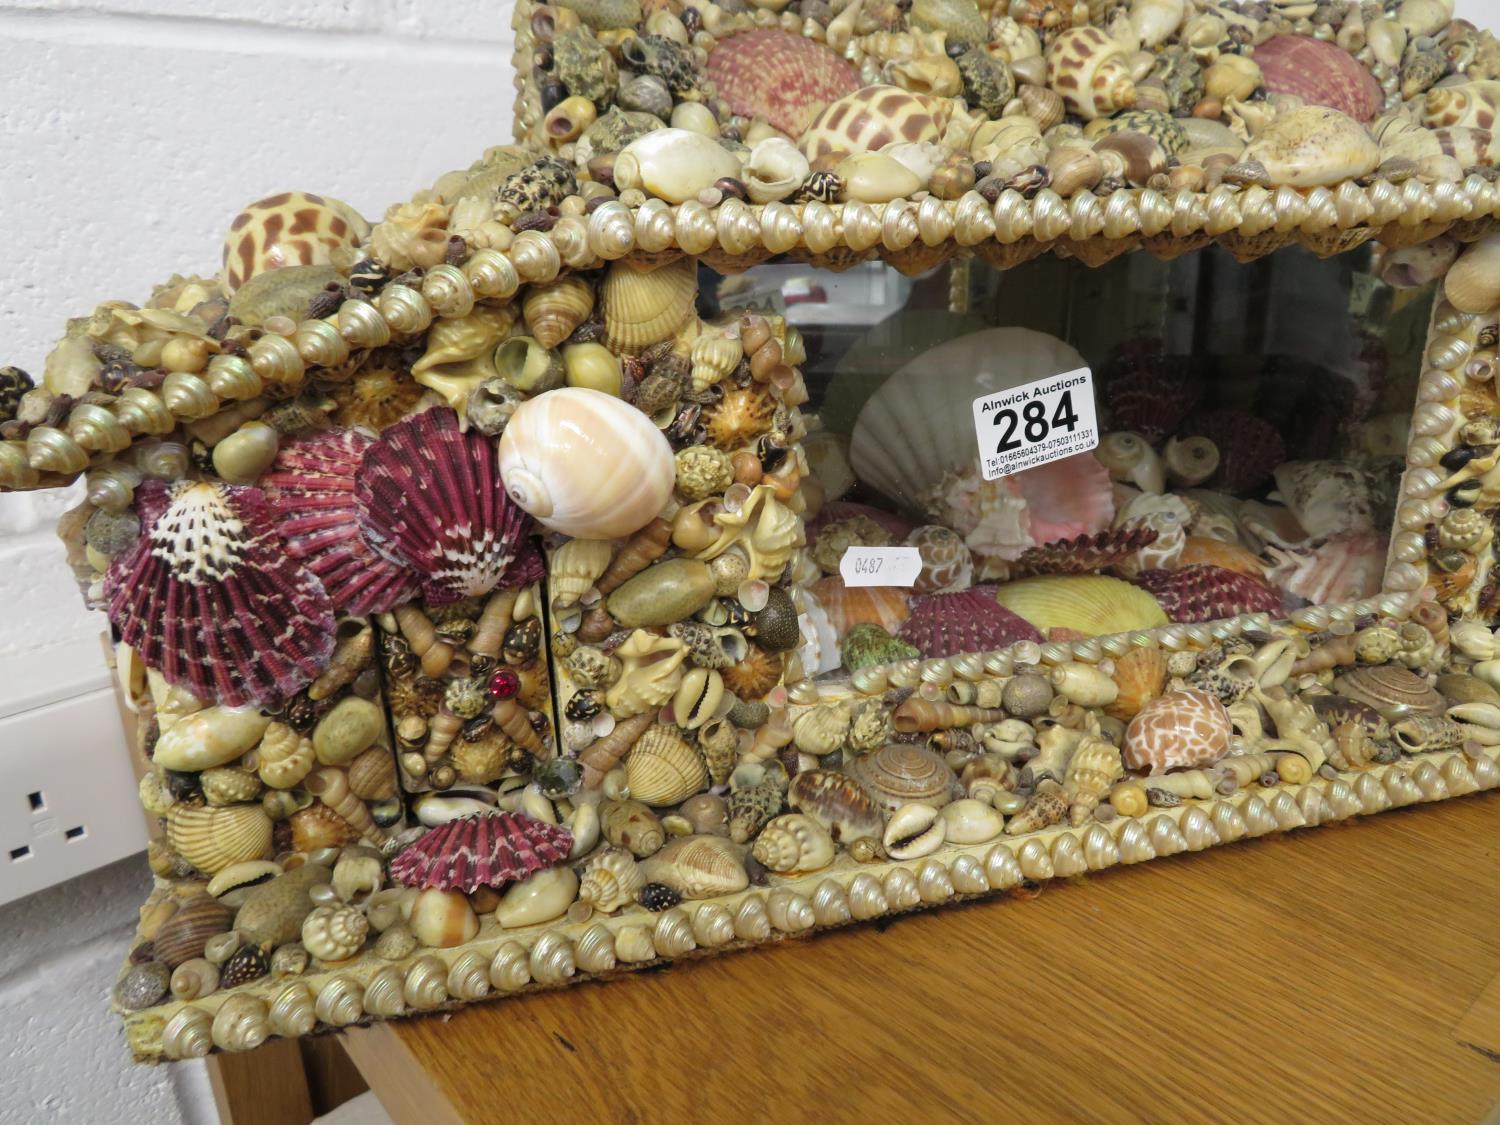 Large 2' x 1' house made of shells with glass grotto interior - Bild 2 aus 7